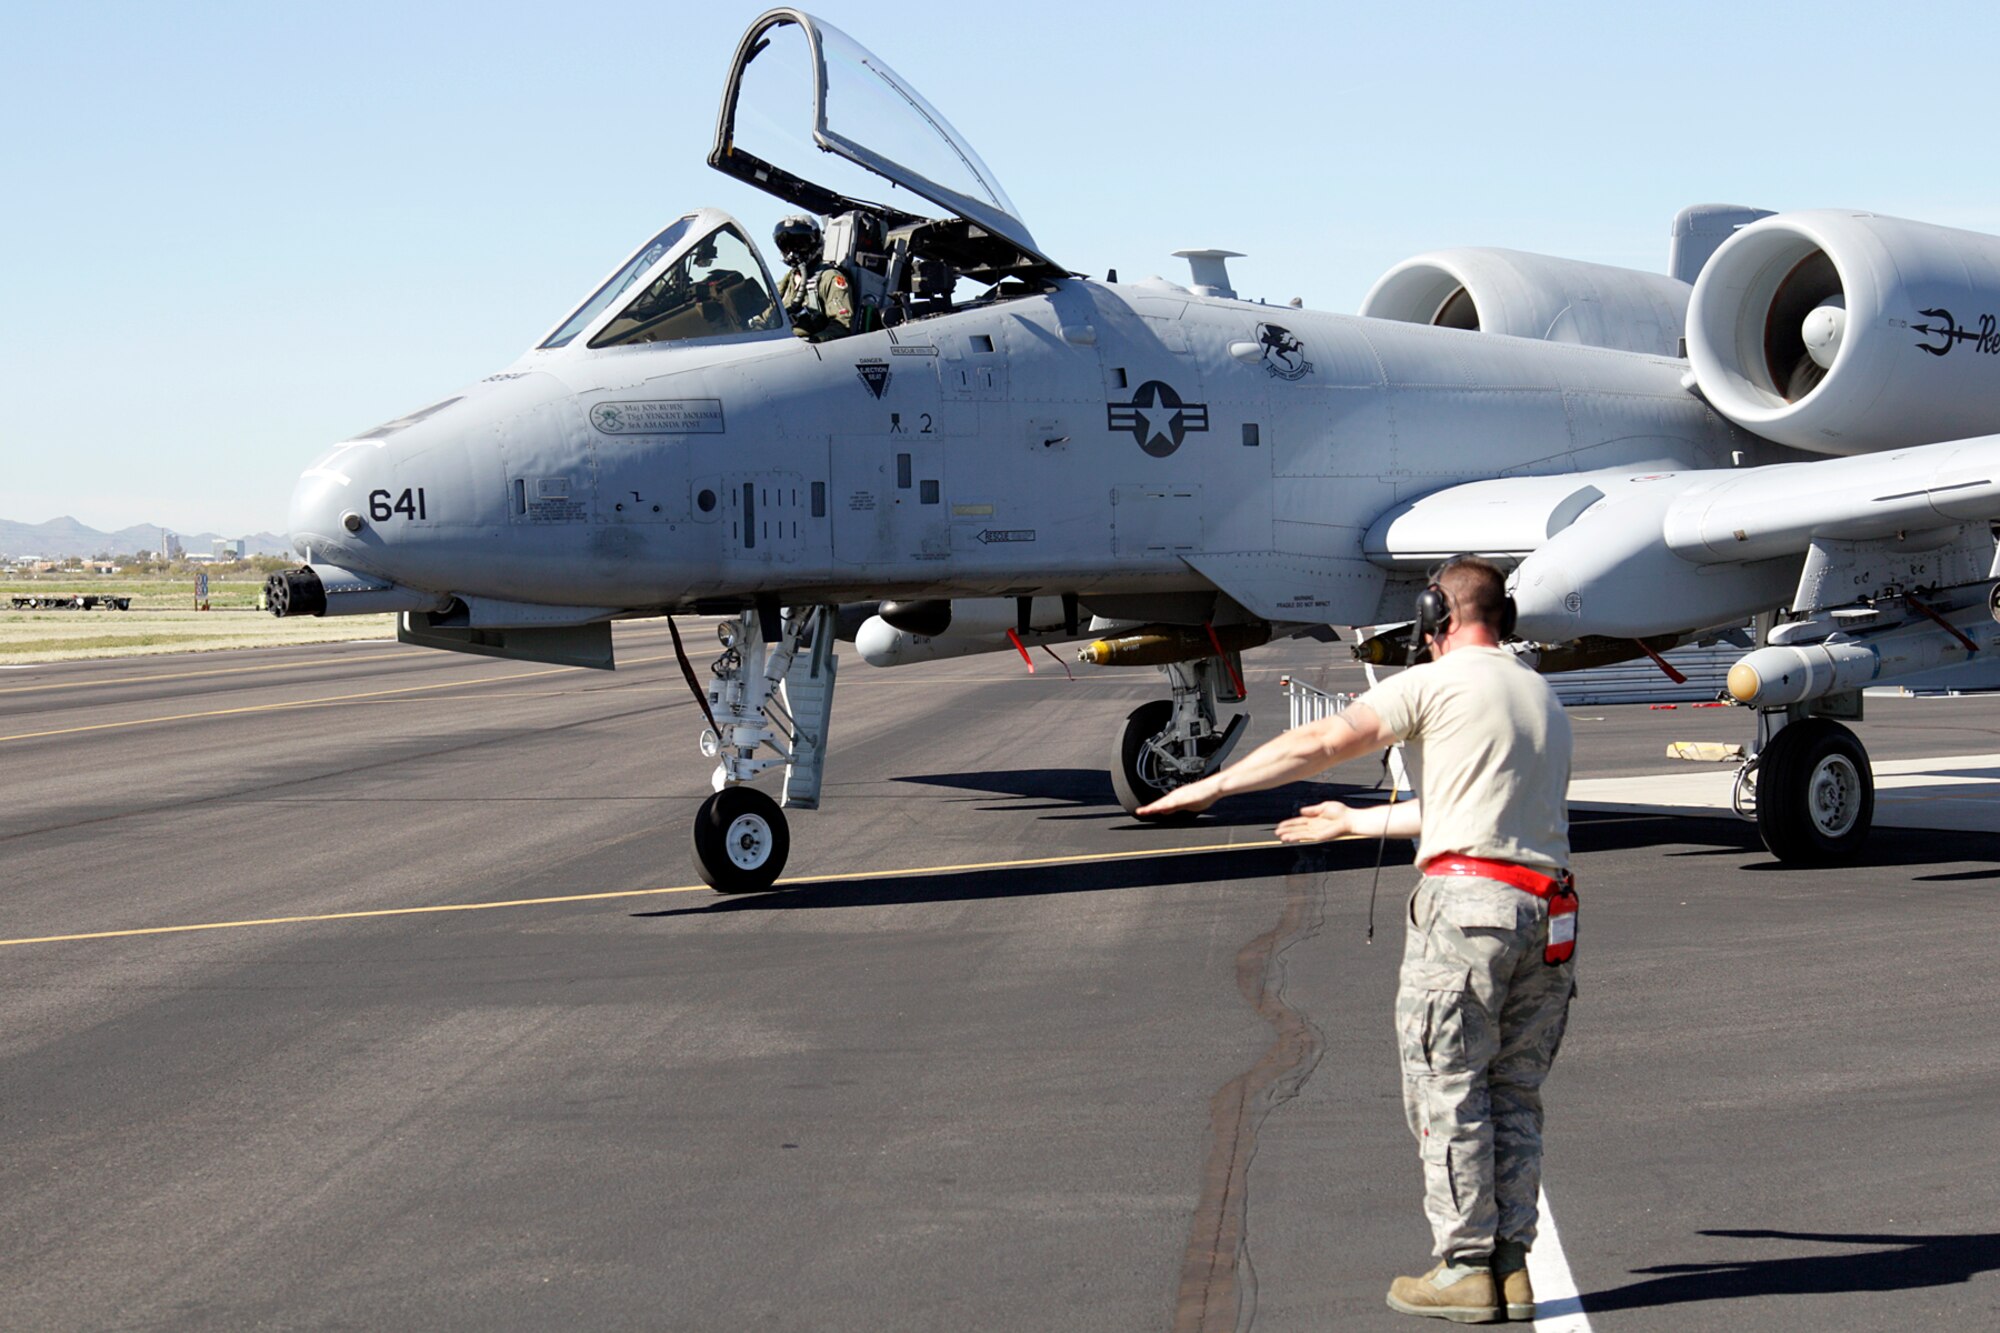 A crew chief from the 127th Maintenance Squadron marshals an A-10 Thunderbolt II for a training mission at Davis-Monthan Air Force Base, Ariz., Feb. 3, 2015. The aircraft is from the 107th Fighter Squadron, 127th Wing, Michigan Air National Guard and is home-stationed at Selfridge Air National Guard Base, Mich. (U.S. Air National Guard photo by Tech. Sgt. Dan Heaton)